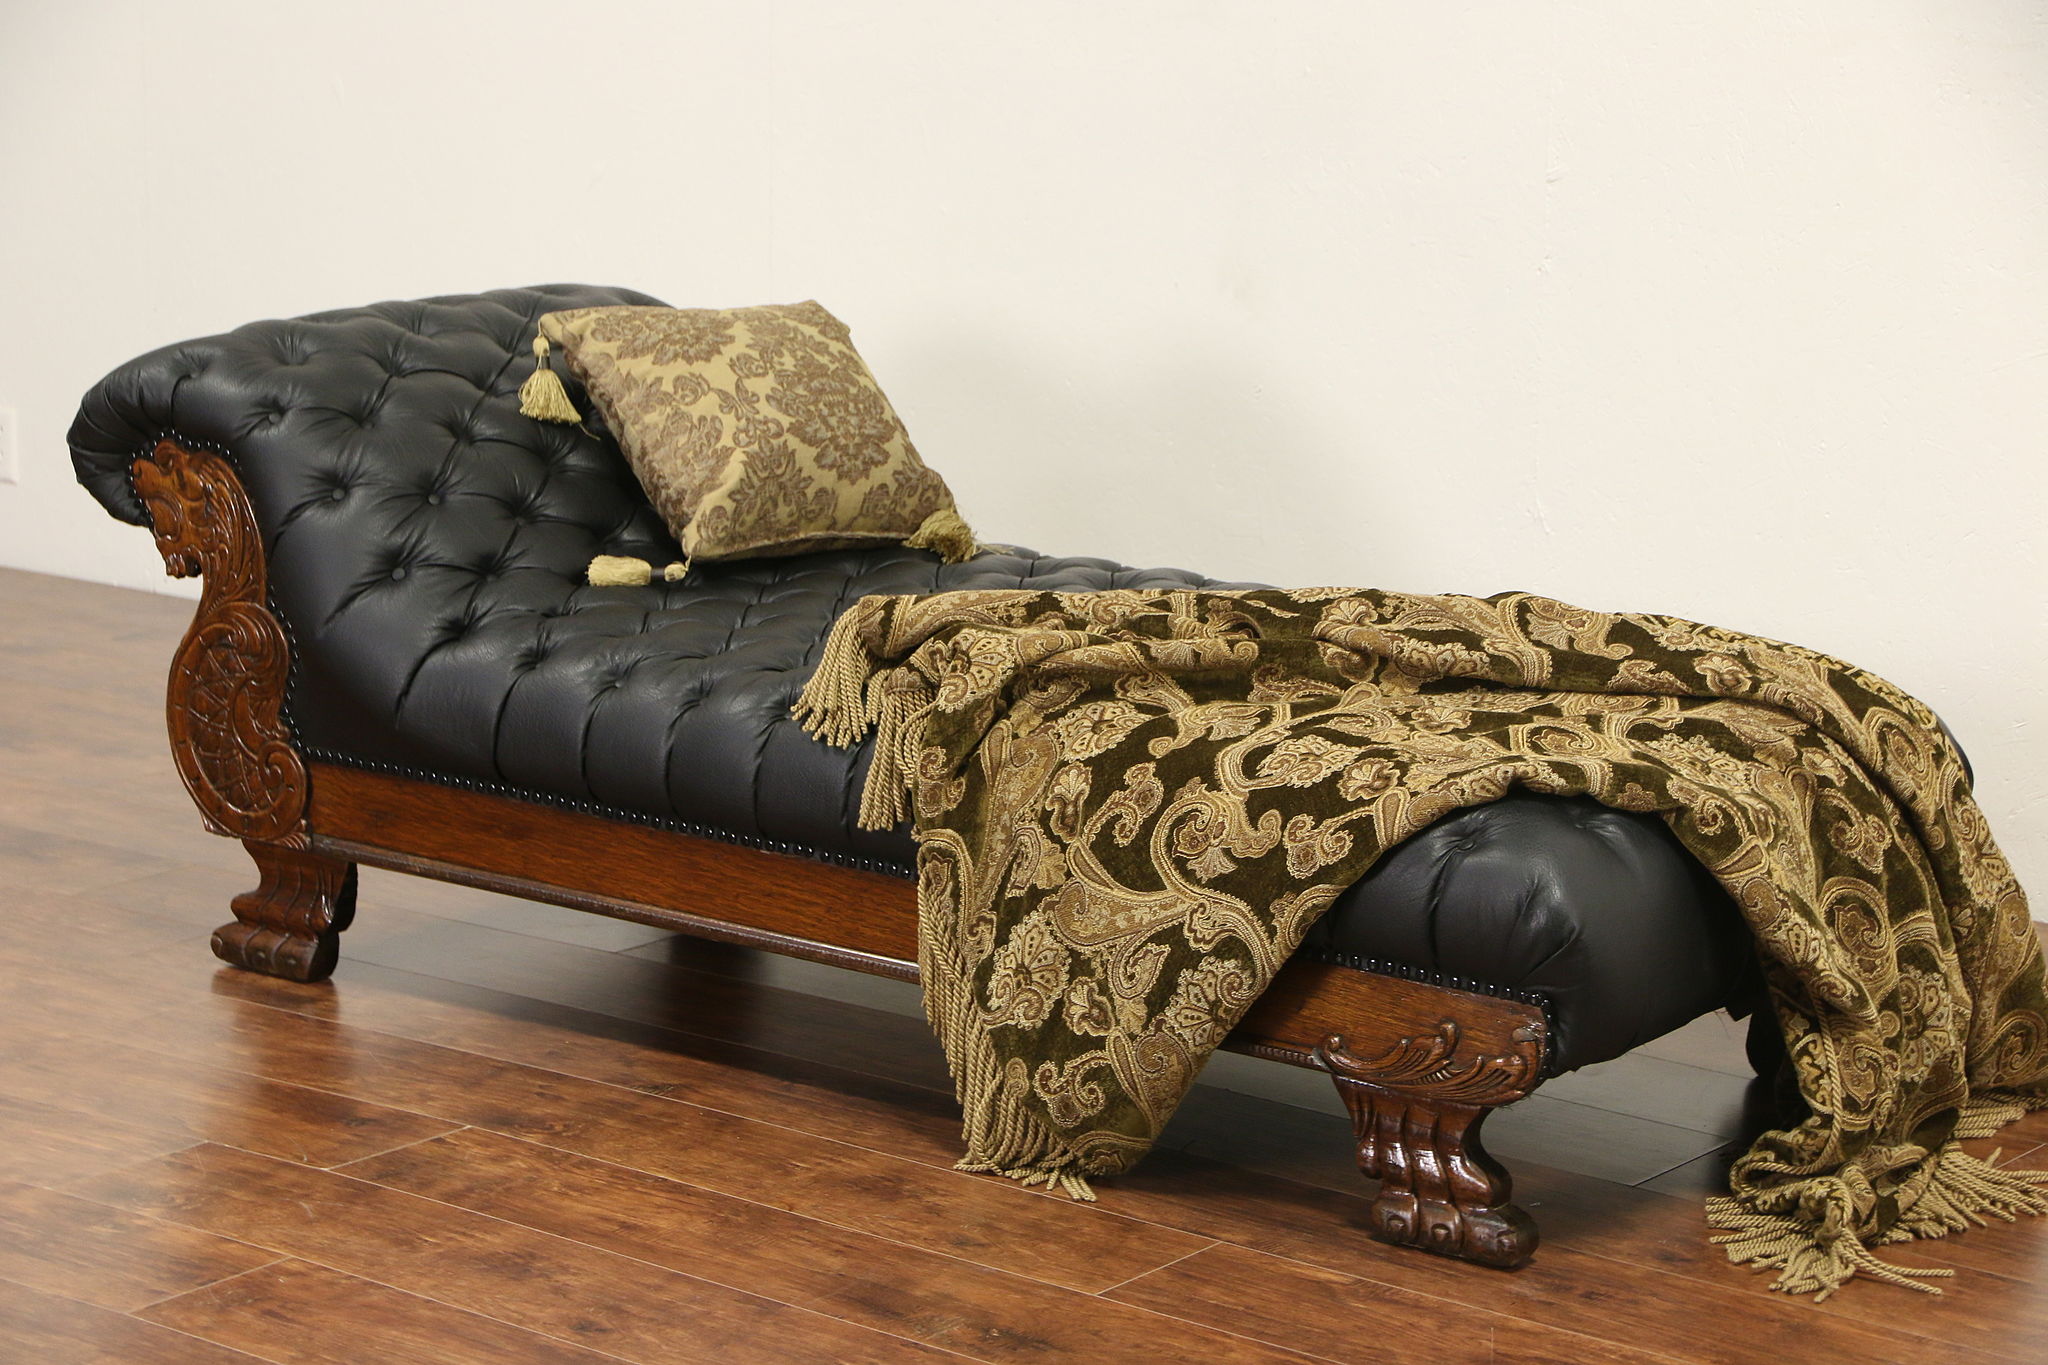 Victorian Lion Carved Antique Oak Chaise Lounge Or Psychiatrist Couch